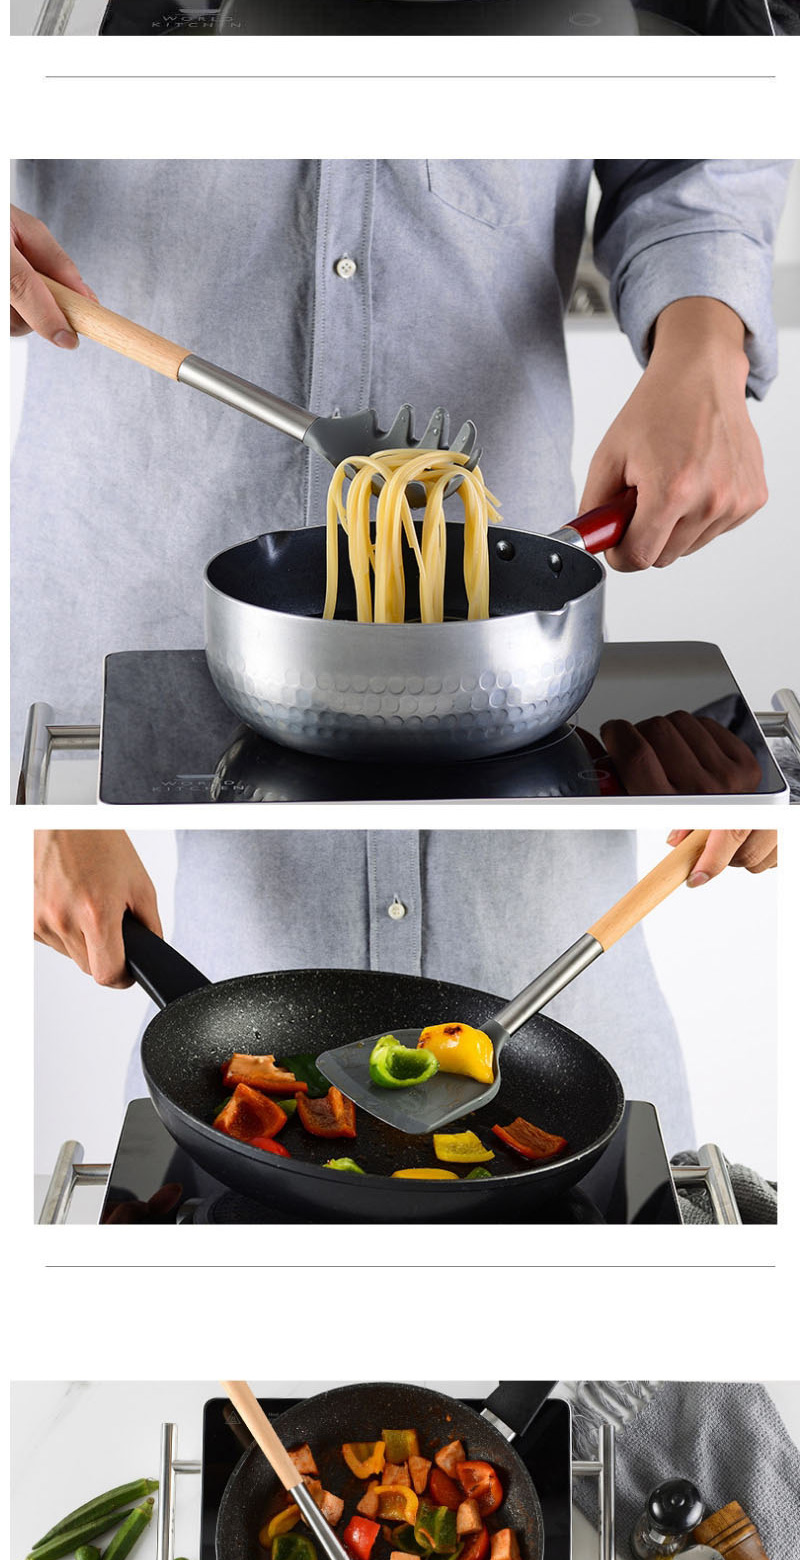 Fashion 6 Sets Of Color Boxes. Food Grade Silicone Solid Wood Handle Kitchen Utensils,Kitchen